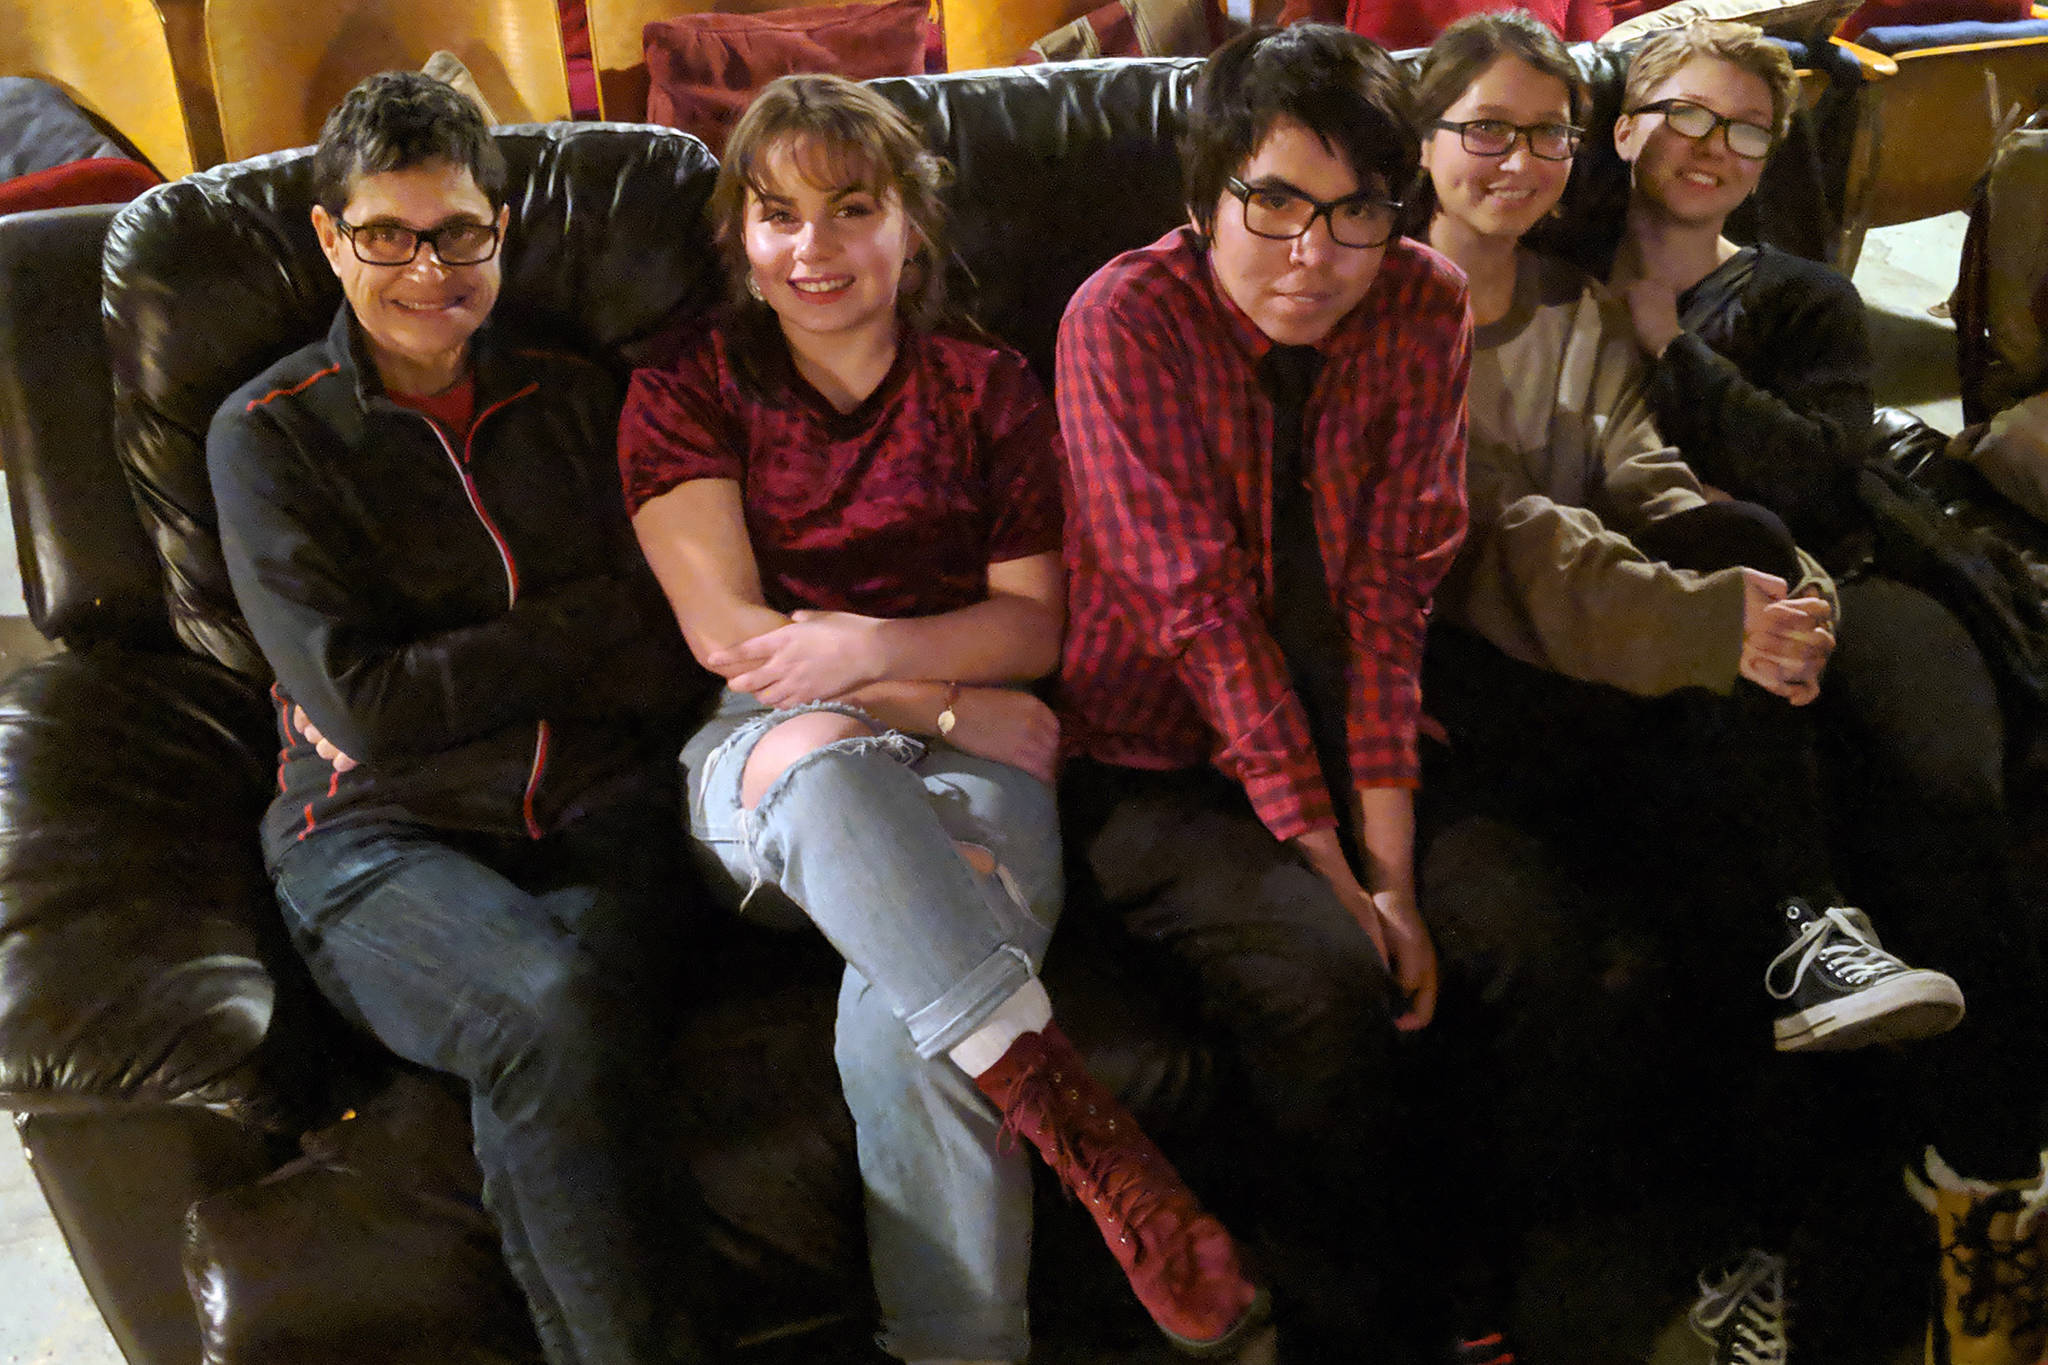 Writer Gina Cole and filmmakers Andrea Cook, Michael Martin Jr., Alyssa Afcan and Haley Shervey, cram onto the couch in the Gold Town Nickelodeon Saturday, Nov. 17. The five were in town for a screening of “Our Alaskan Stories” short films. (Ben Hohenstatt | Capital City Weekly)